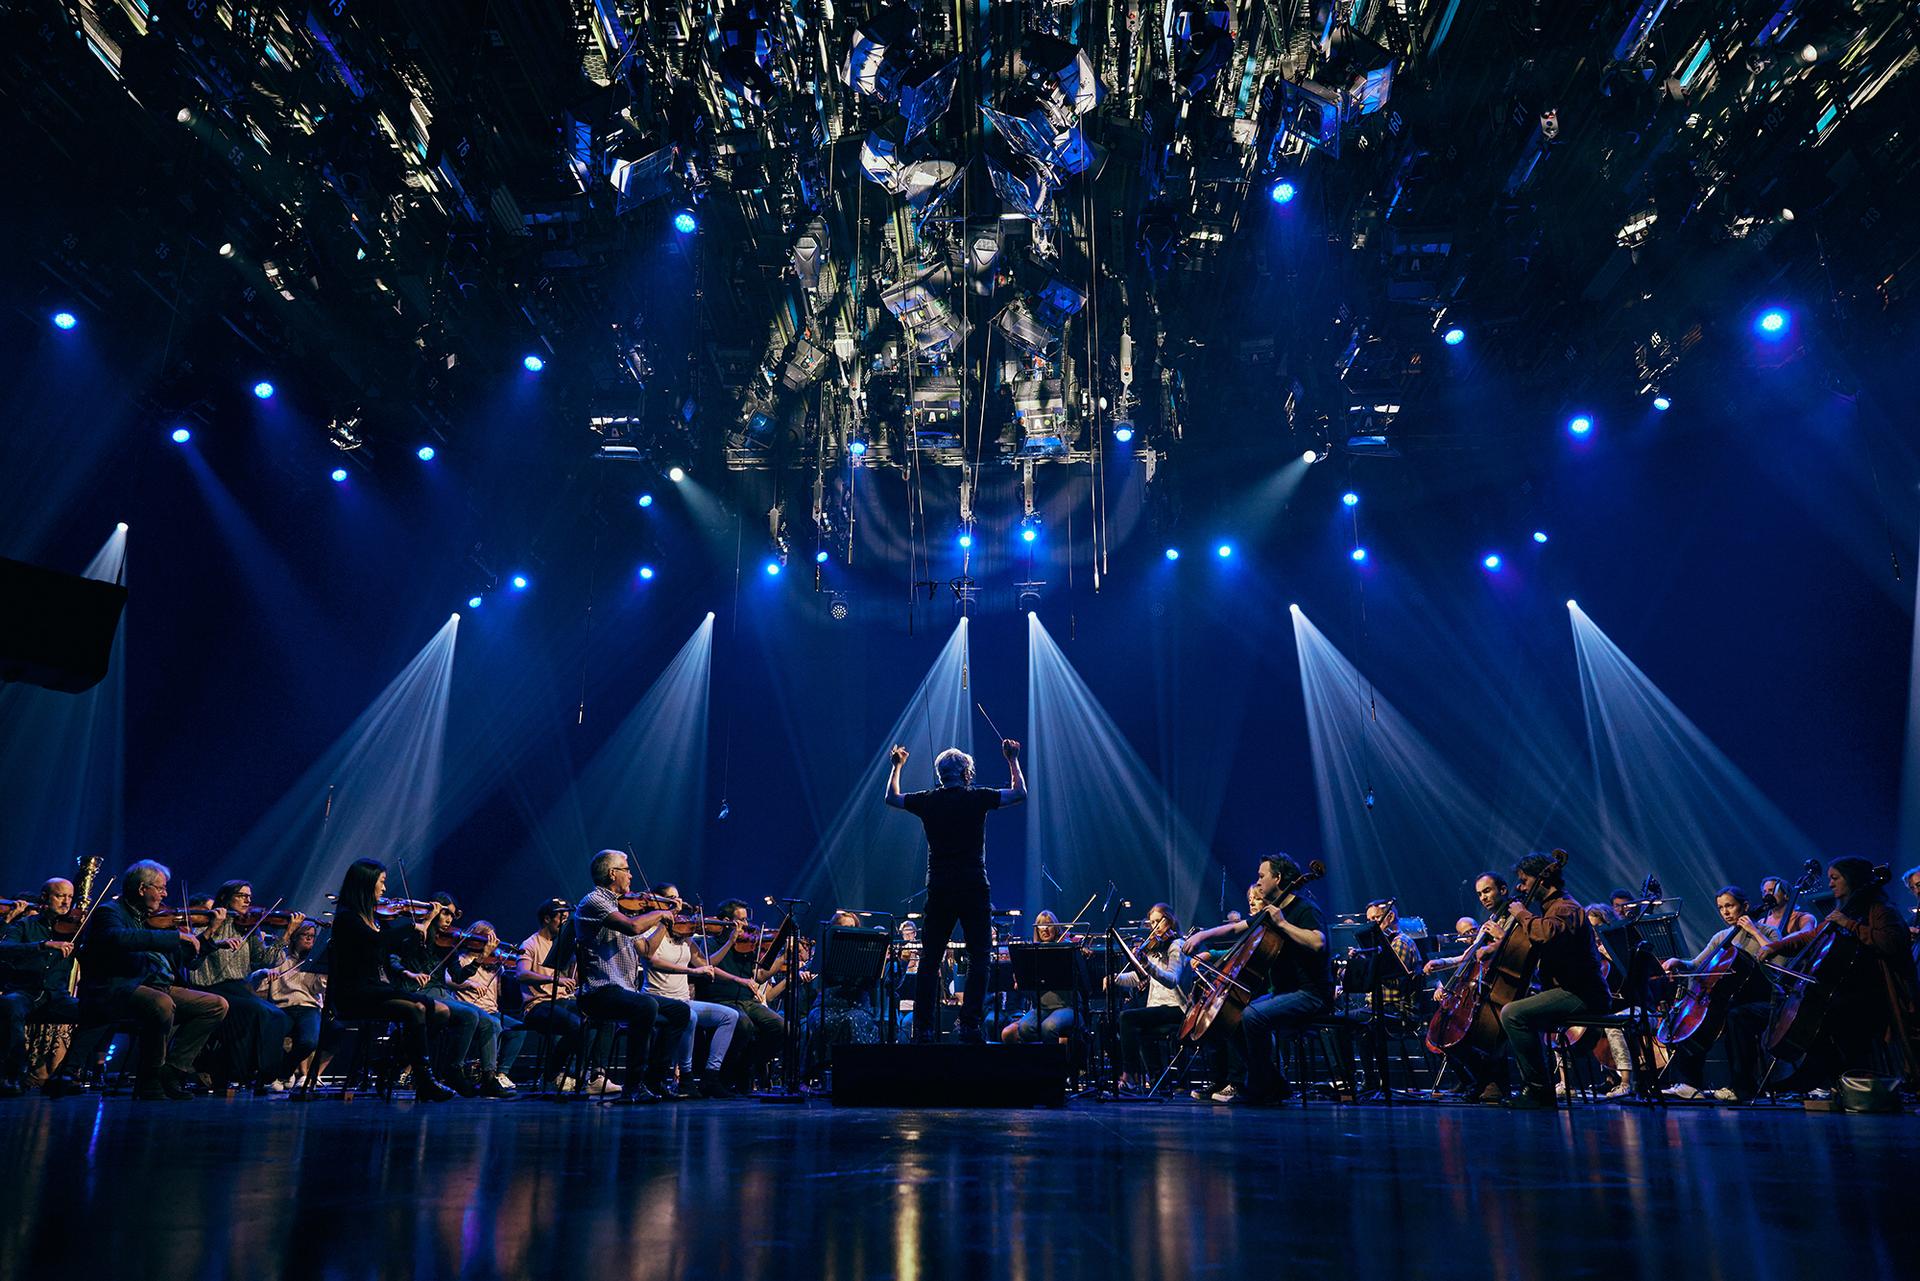 Conductor Peter Breiner leading the Royal Philharmonic Orchestra at the recording of global livestream performances of Igor Stravinsky's The Firebird, Petrushka, and The Rite Of Spring under blue lights